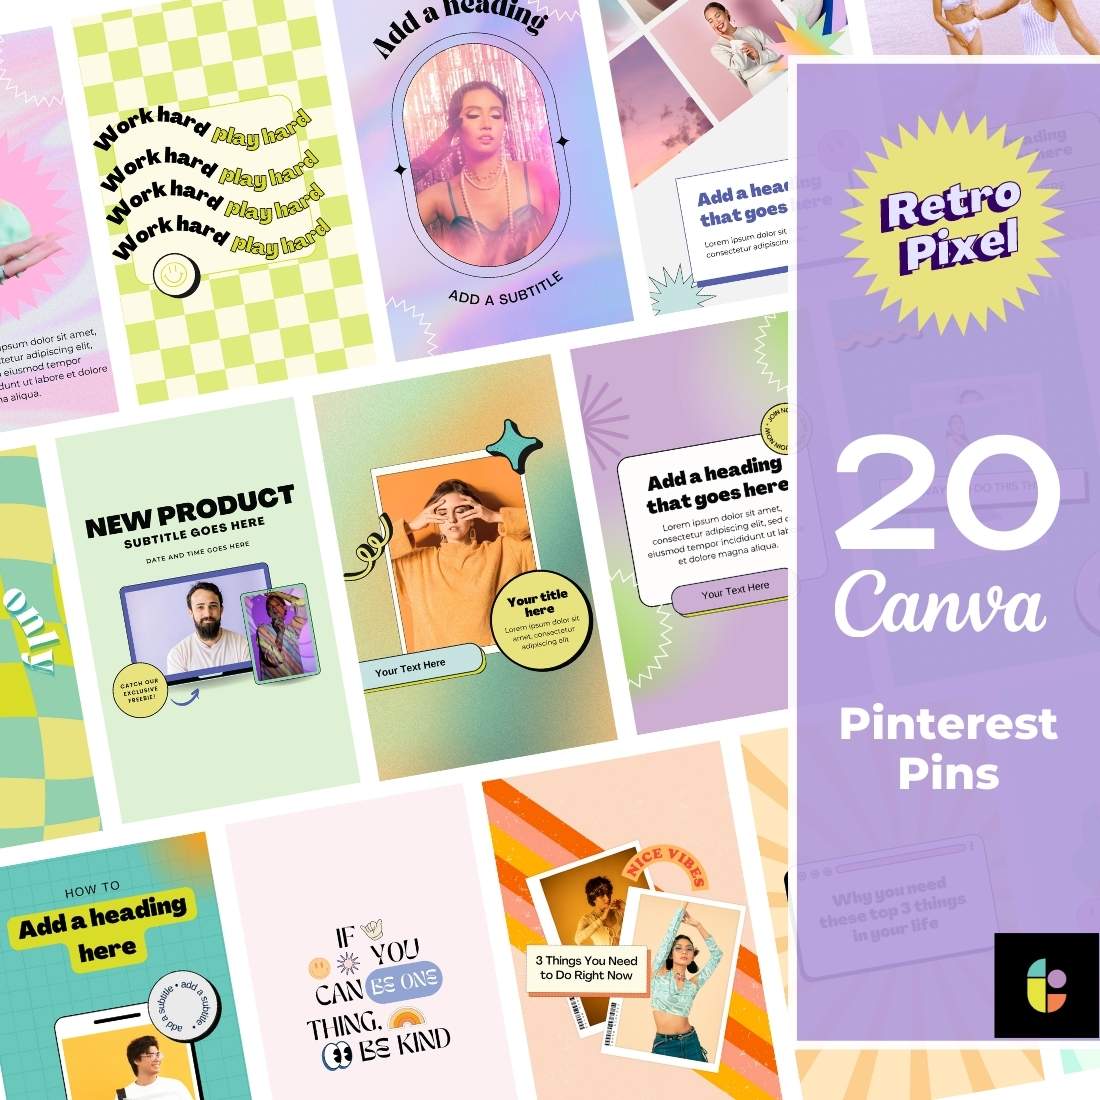 Retro Pinterest Pins Canva Template cover image.